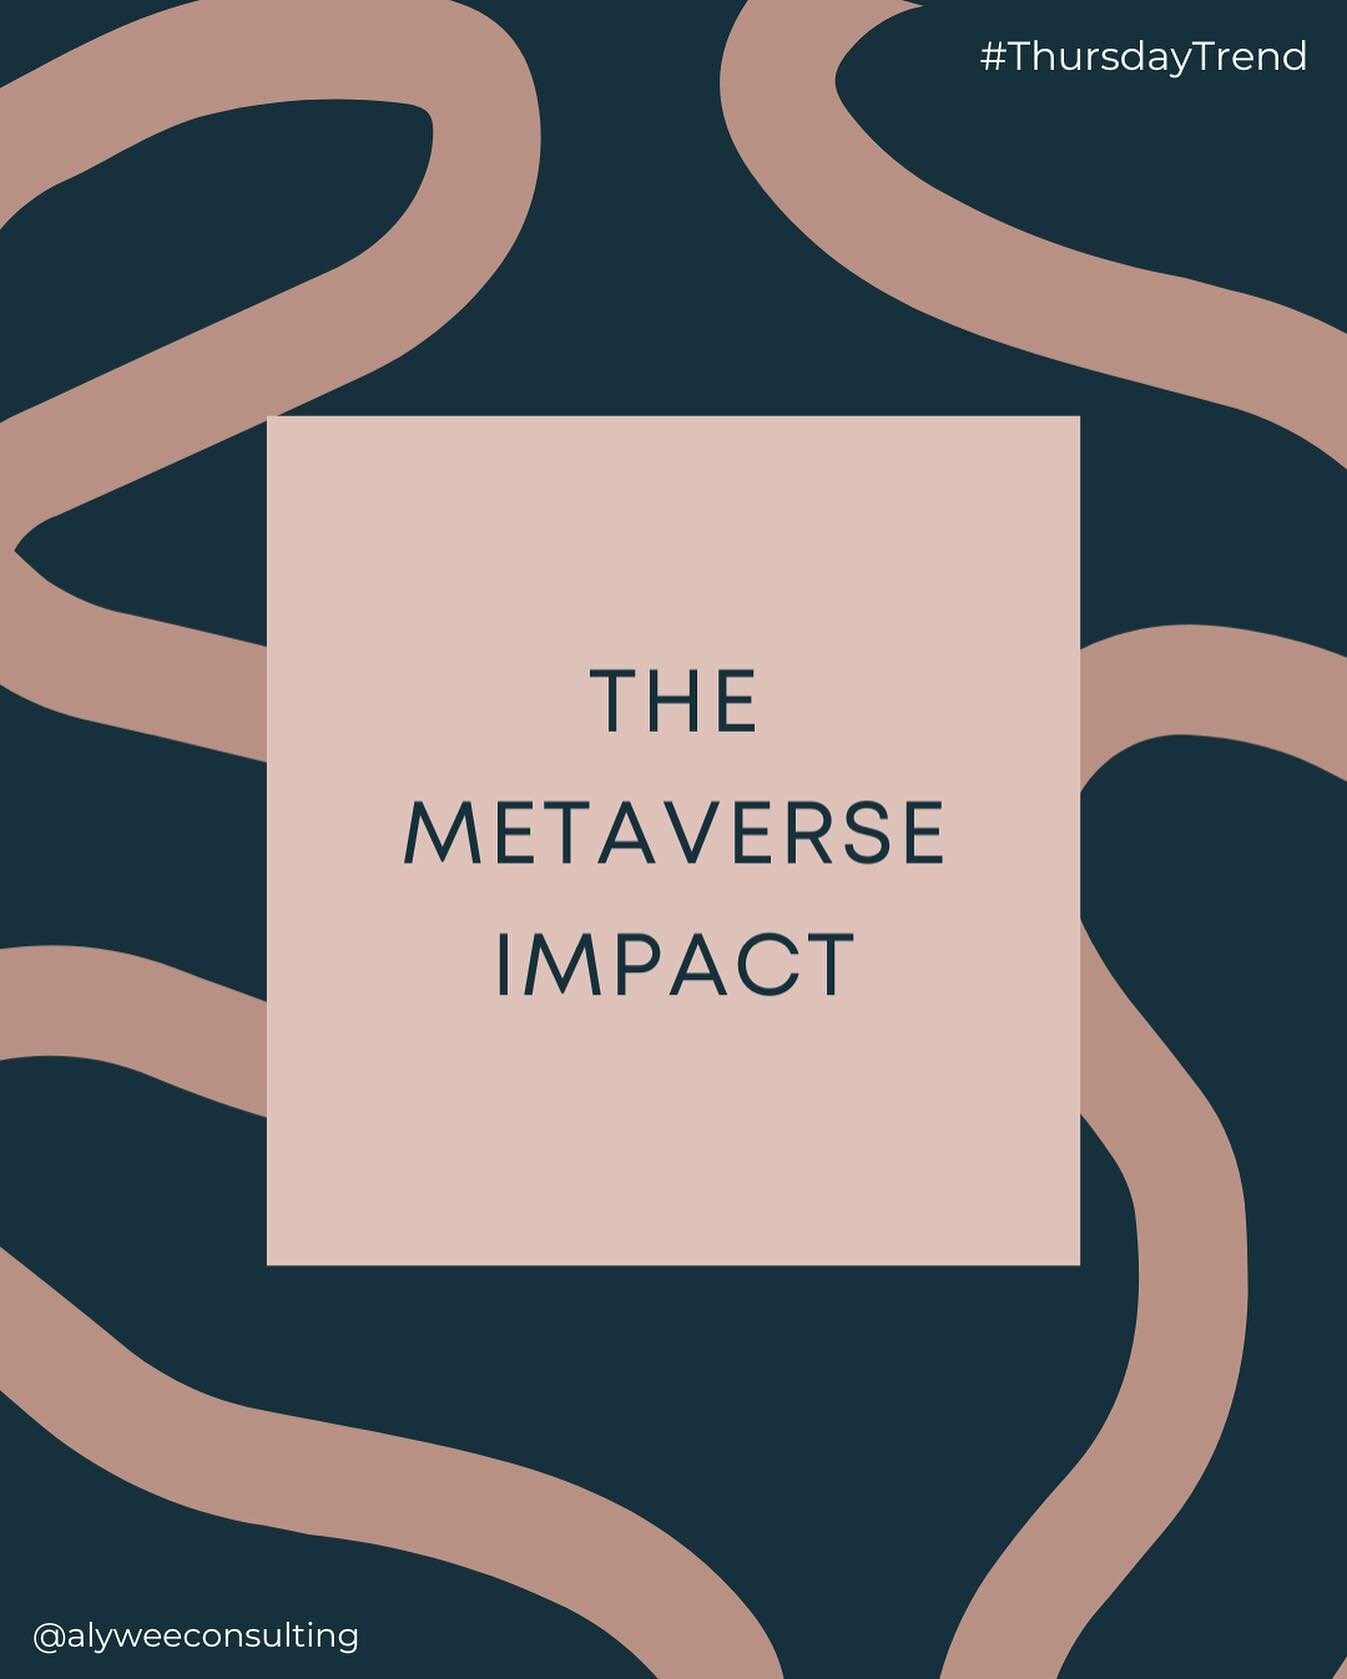 #ThursdayTrend: The Metaverse Impact on Revenue
 
🌍 Embrace the Digital Realm! Dive into the future with this #ThursdayTrend, exploring how the metaverse can directly influence hospitality revenue. From virtual experiences to NFT-based bookings, dis